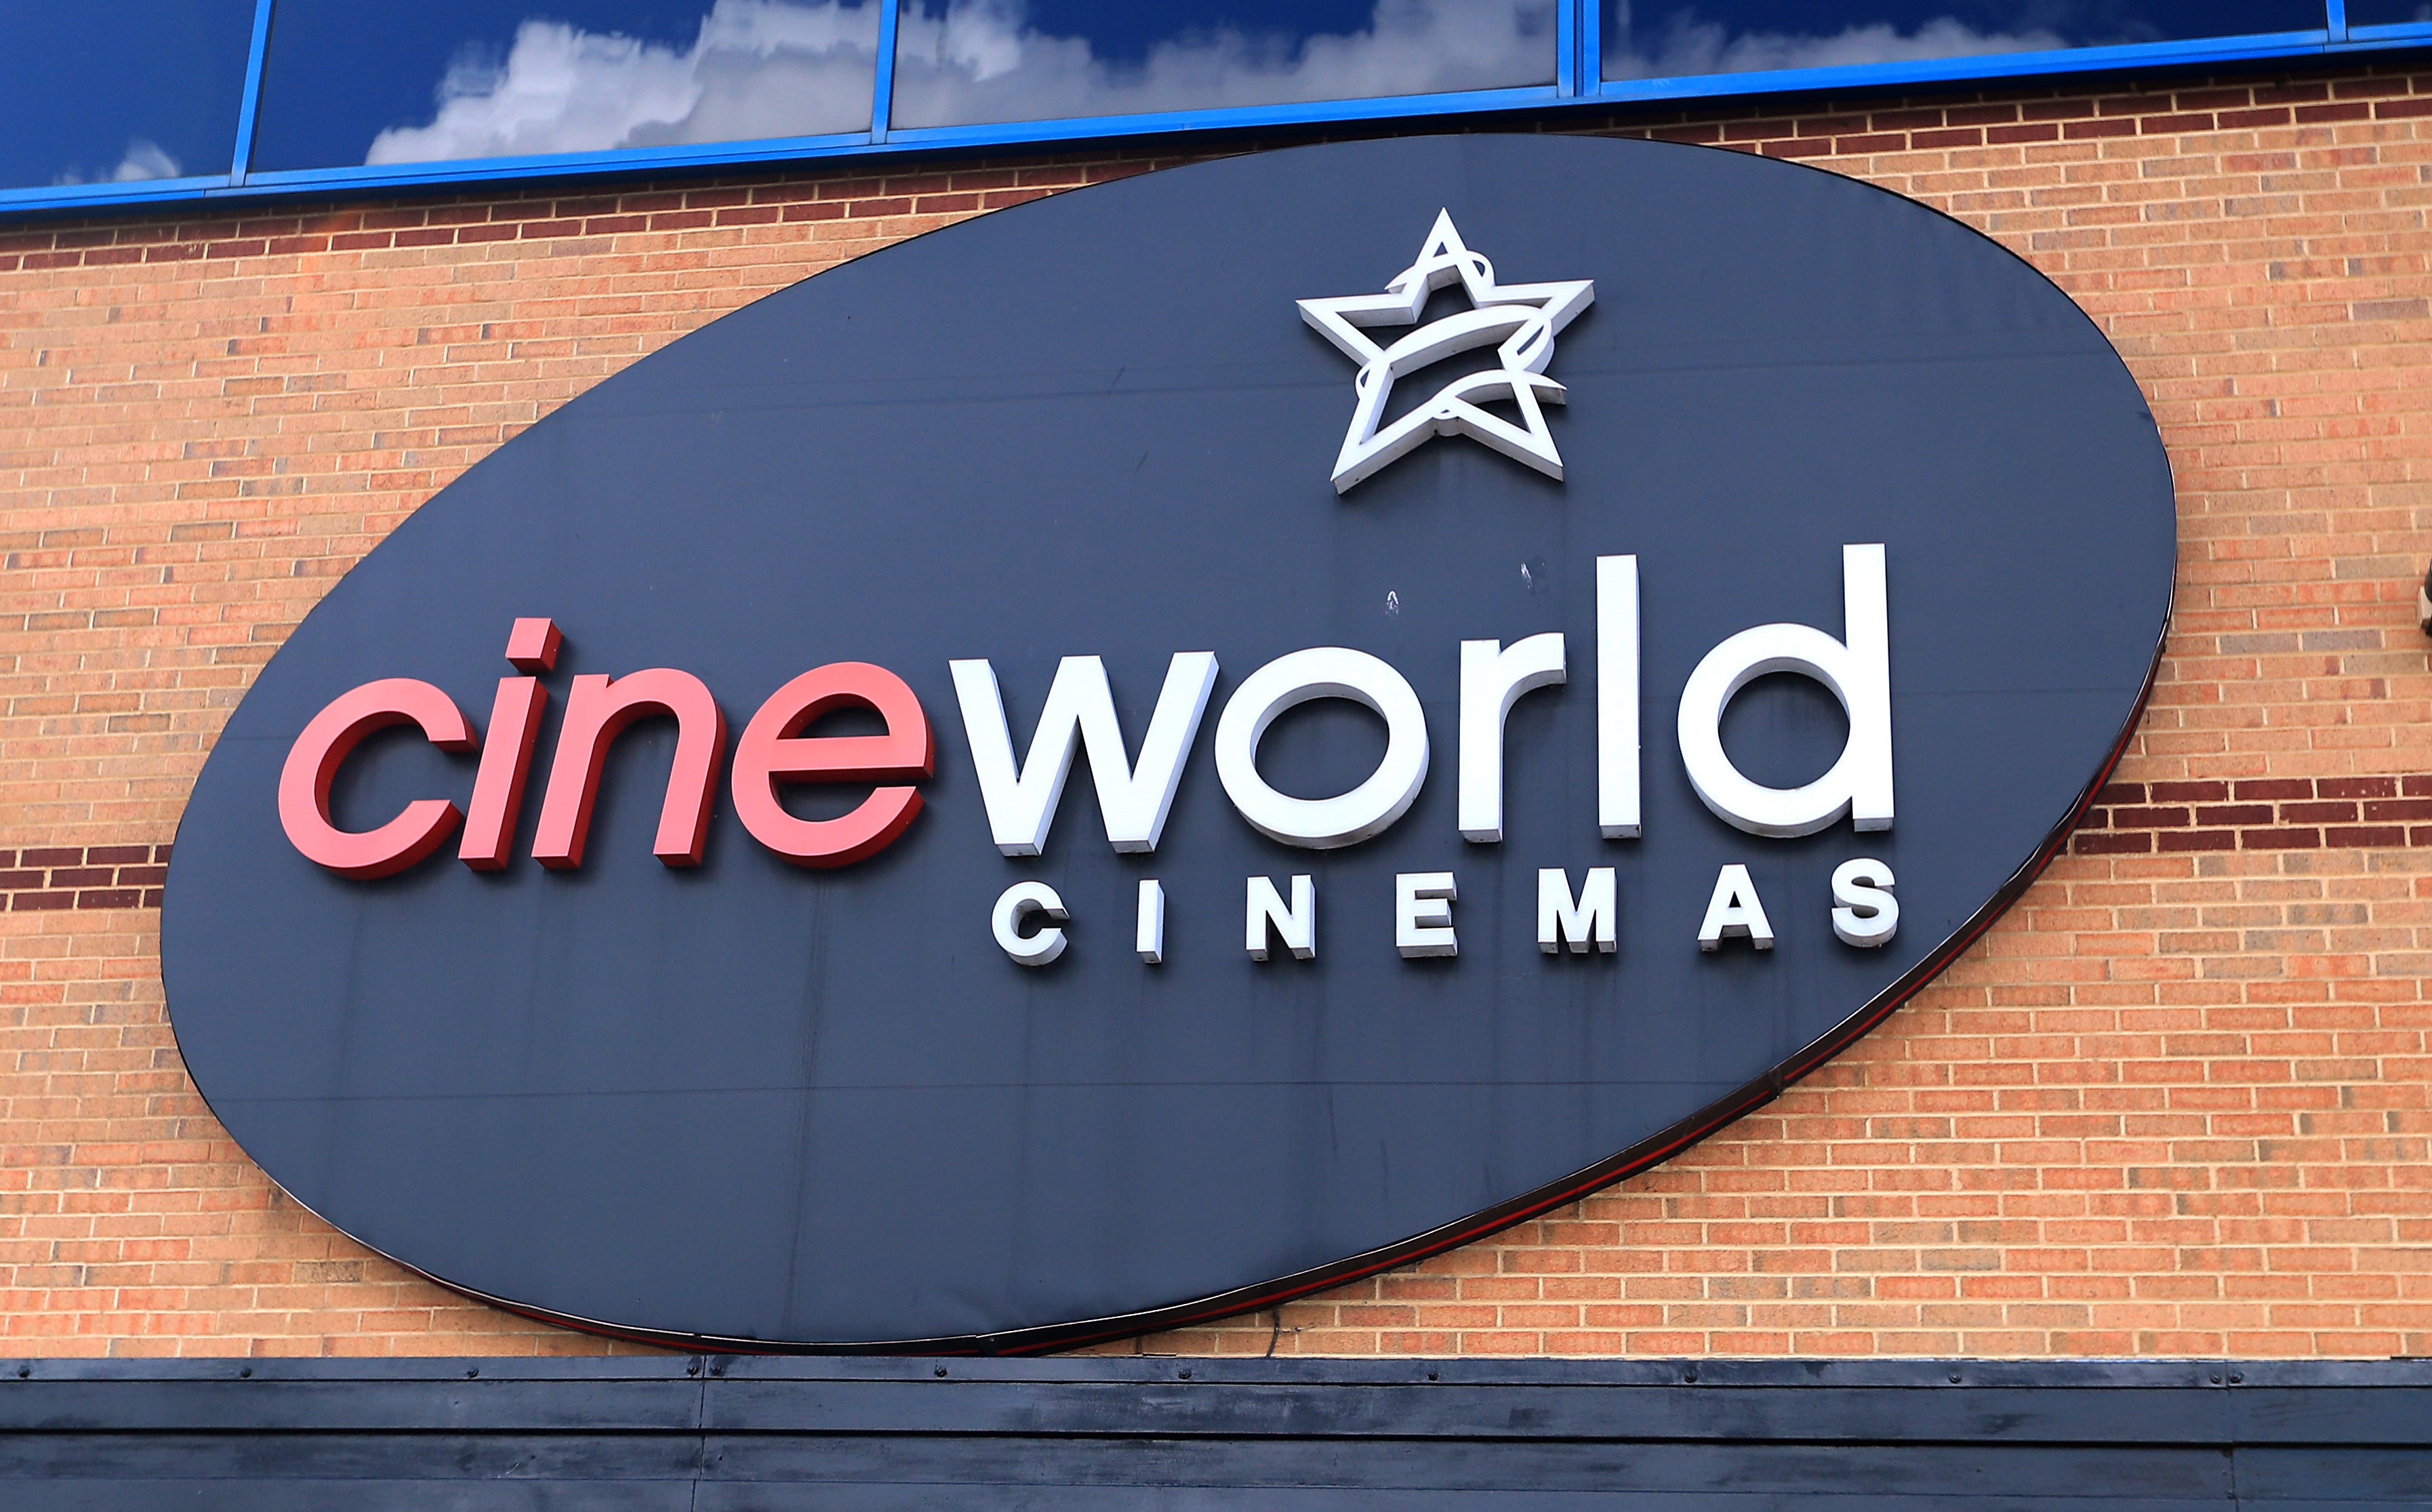 Film fans have not returned to cinemas in the numbers that Cineworld had expected